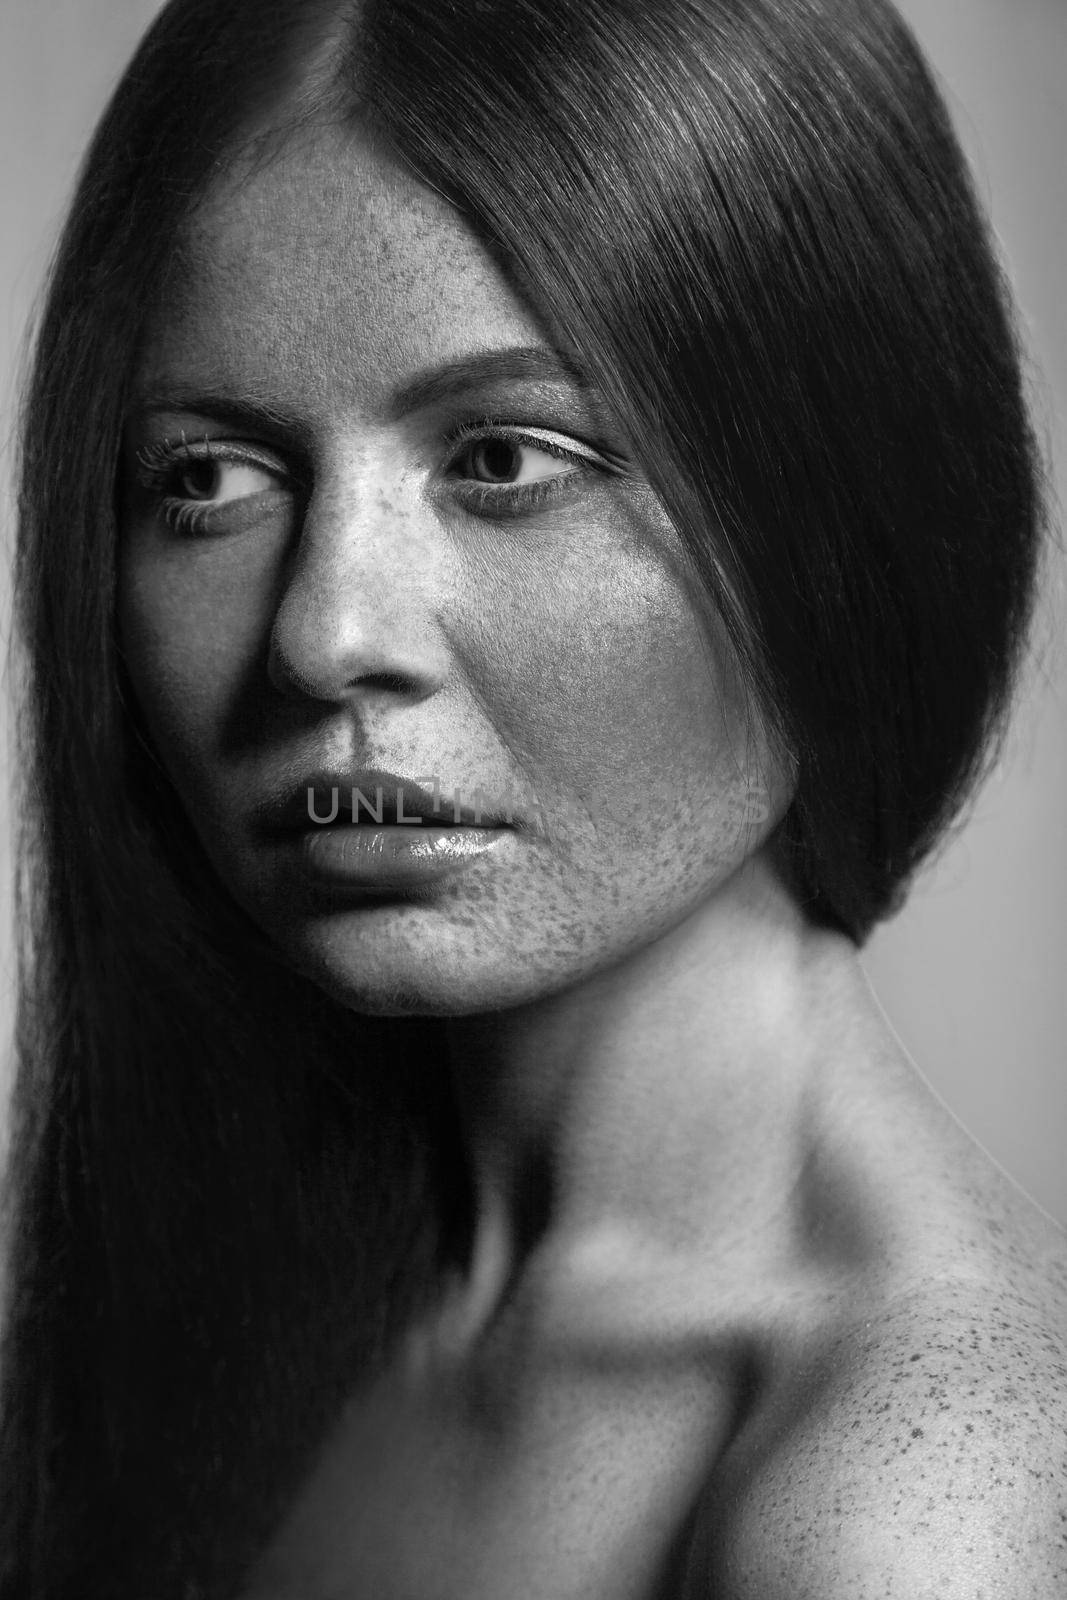 Black and white beauty with freckles. by Khosro1